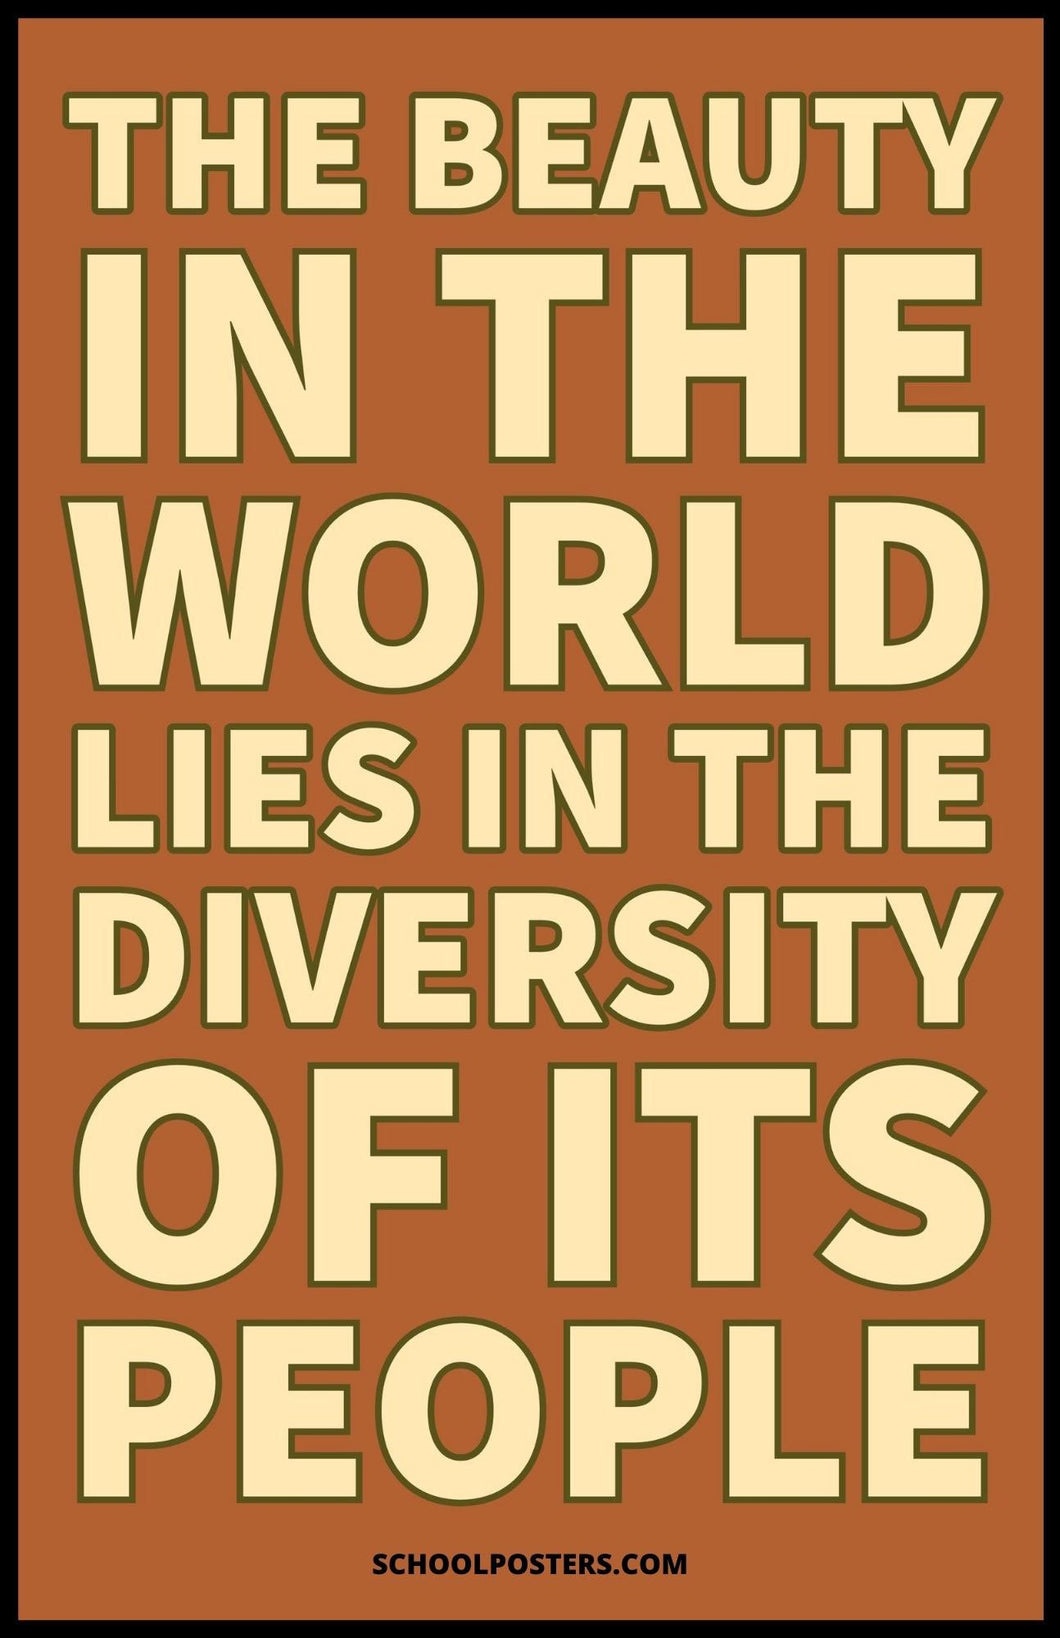 The Beauty In The World Lies In The Diversity Of Its People Poster